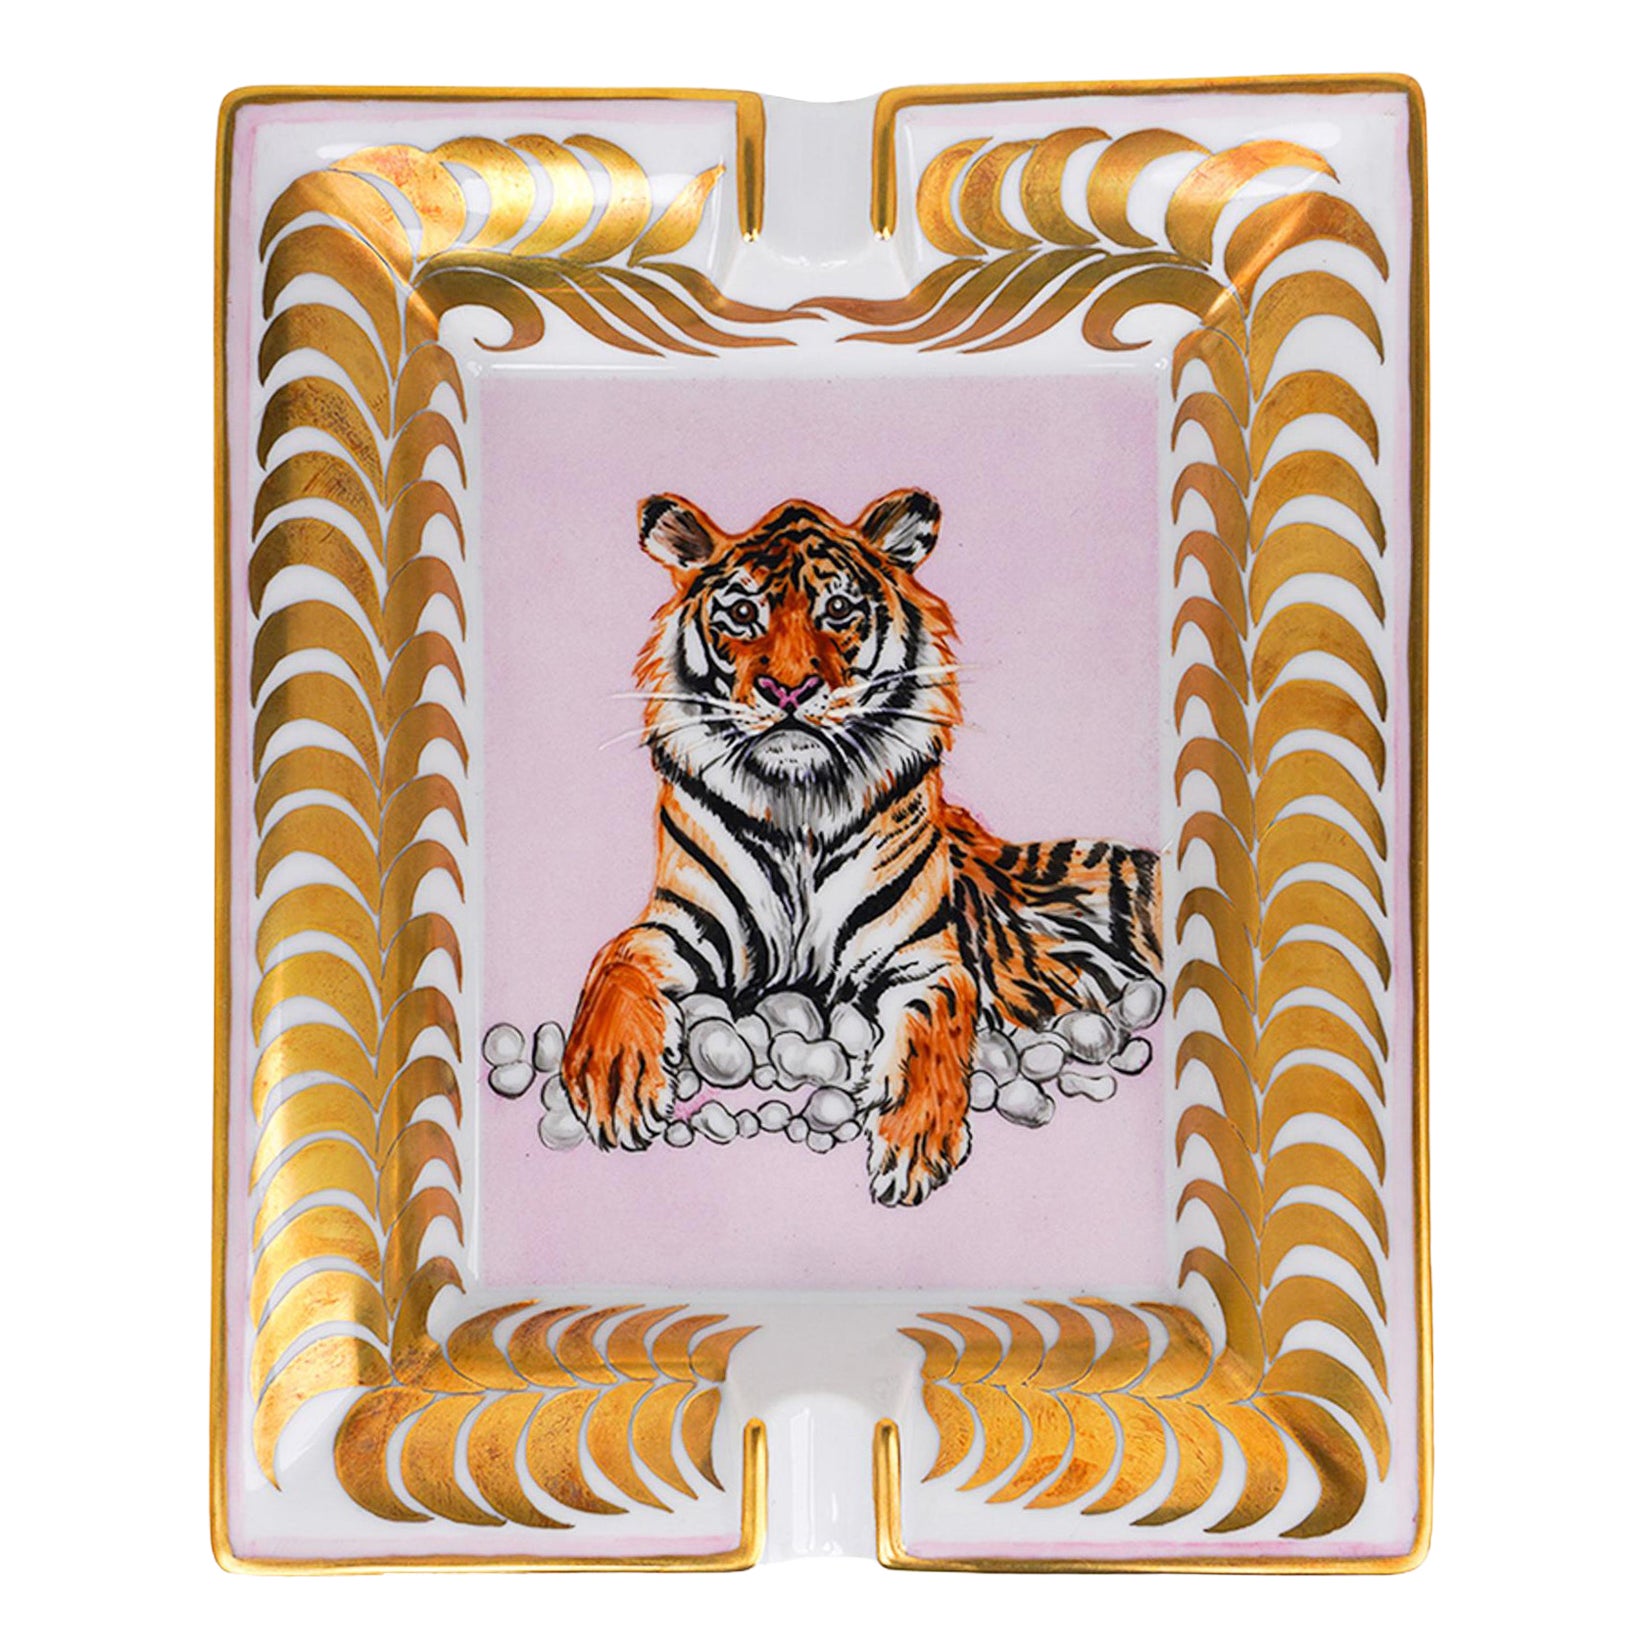 Hermes Change Tray Tigre Royal Or / Rose Hand Painted New w/ Box